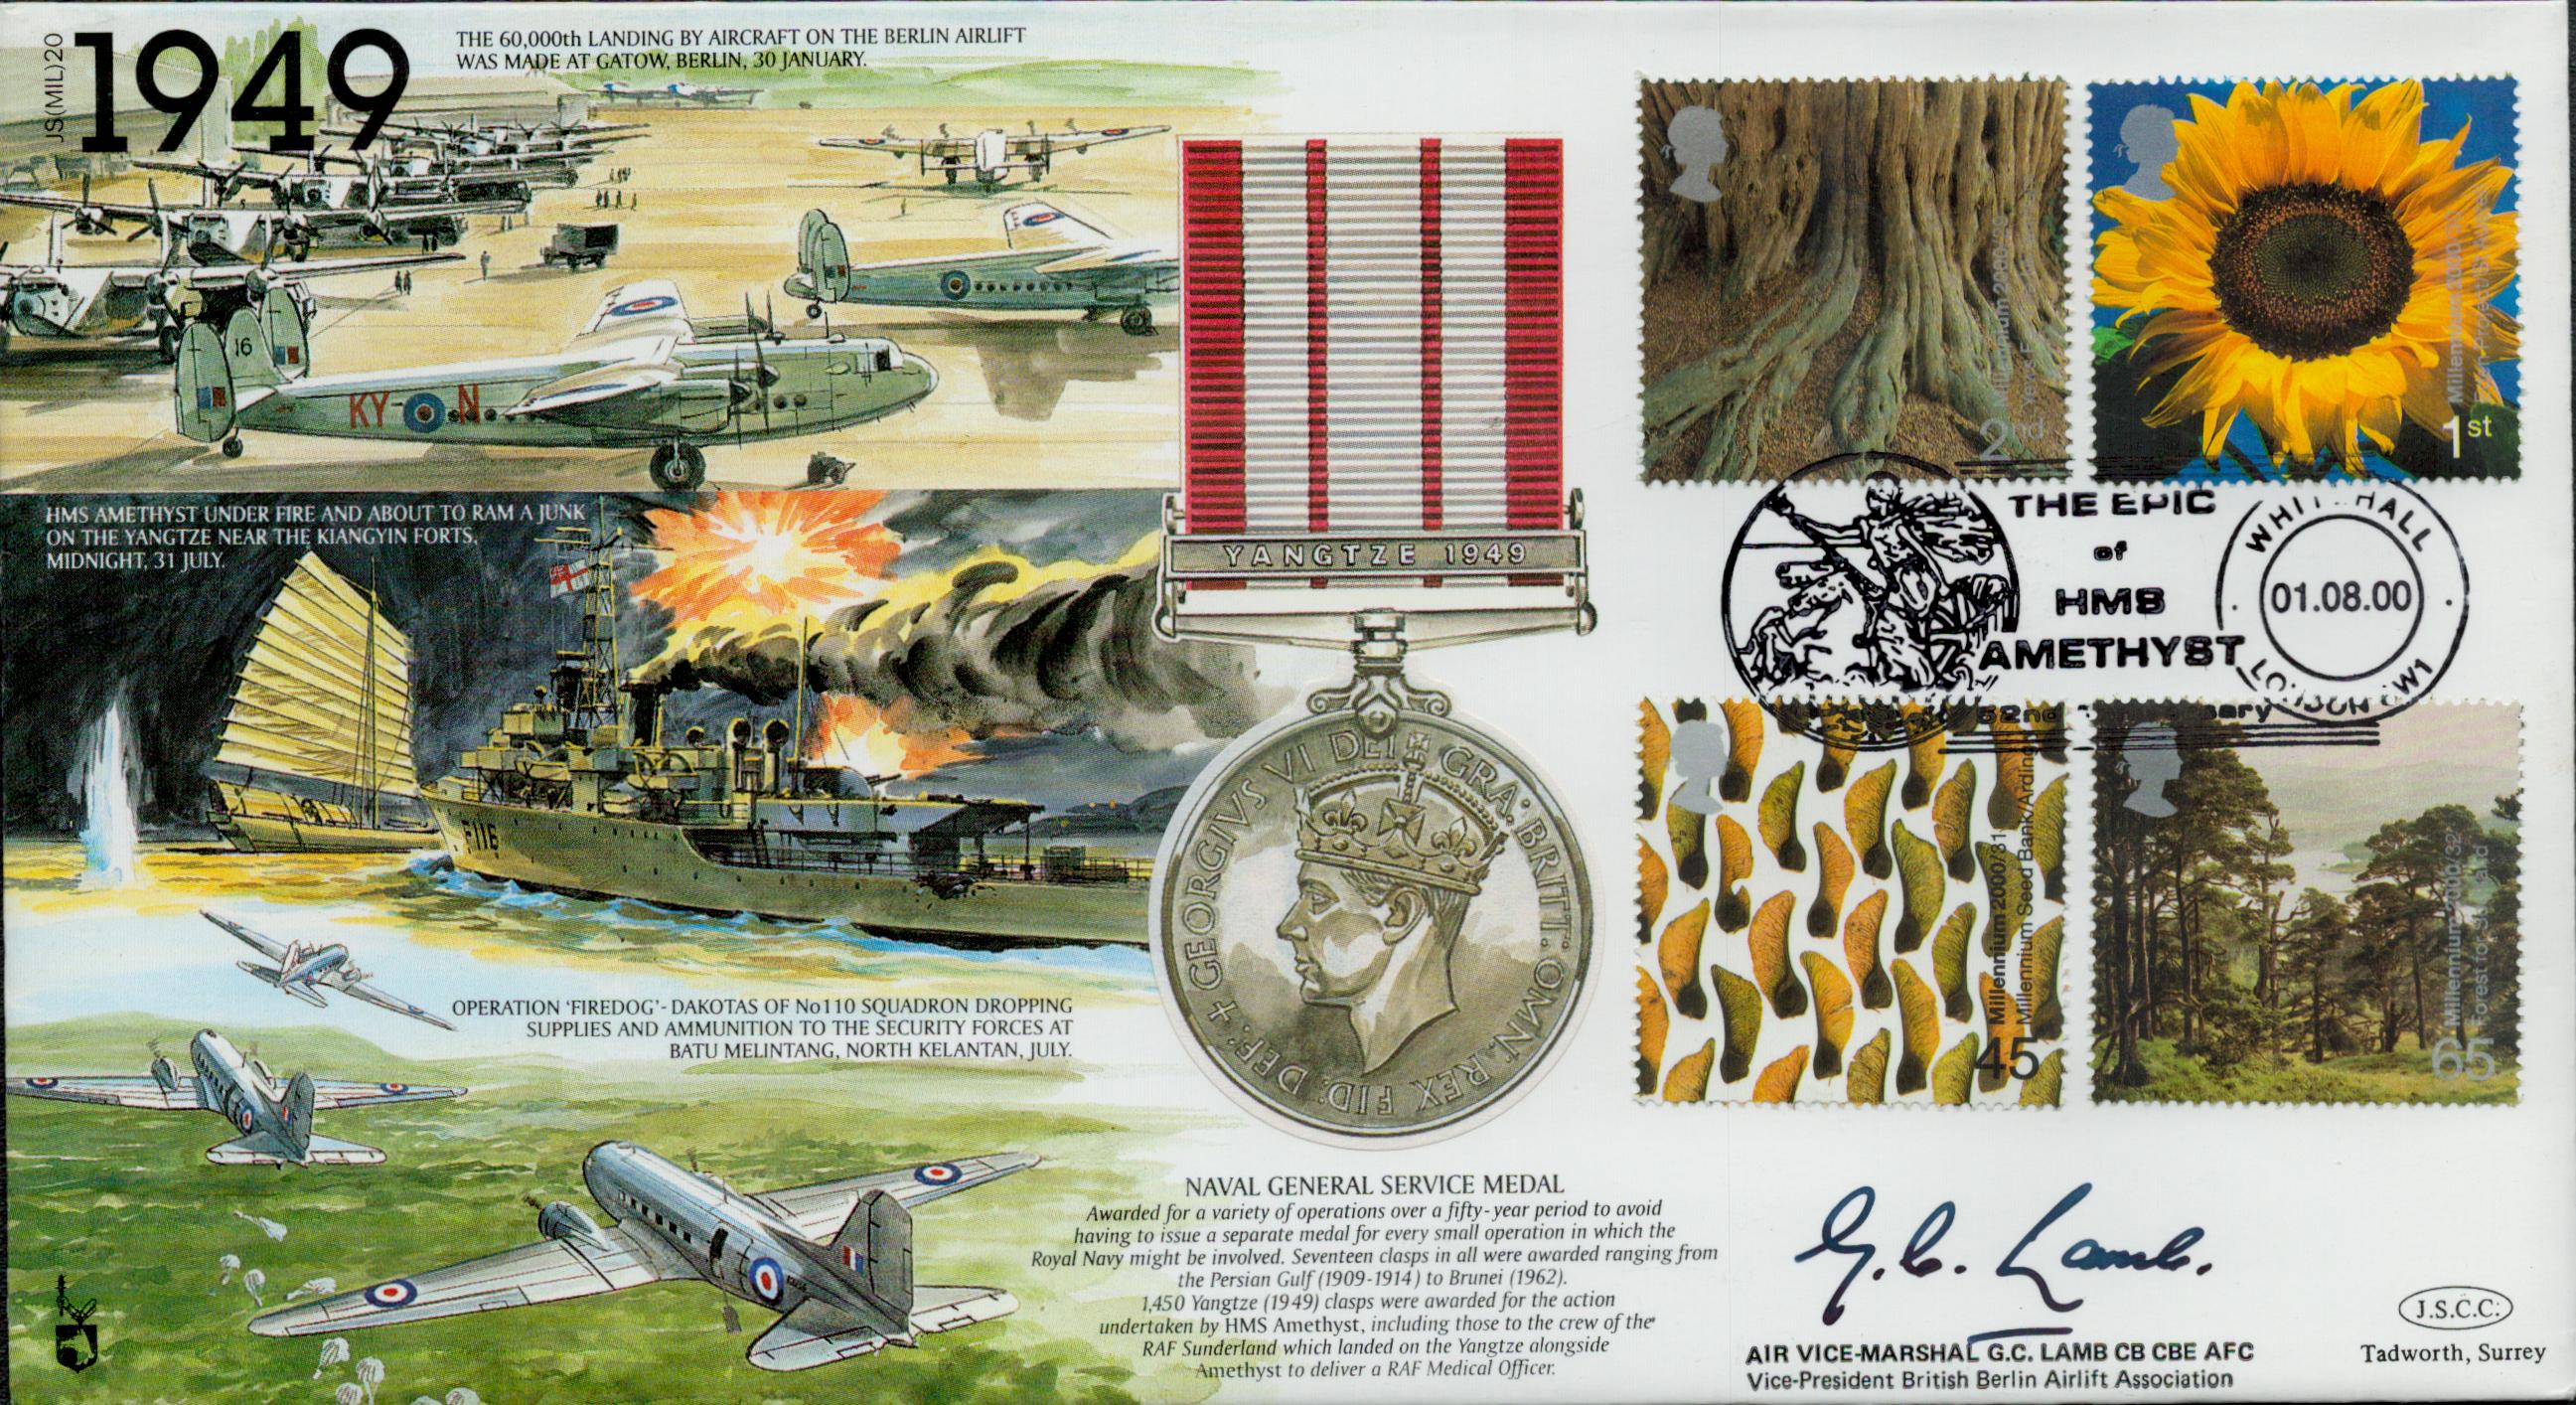 Air Vice Marshal G.C Lamb CB CBE AFC signed 1949 HMS Amethyst commemorative FDC (JS(MIL)20) PM THE - Image 2 of 3